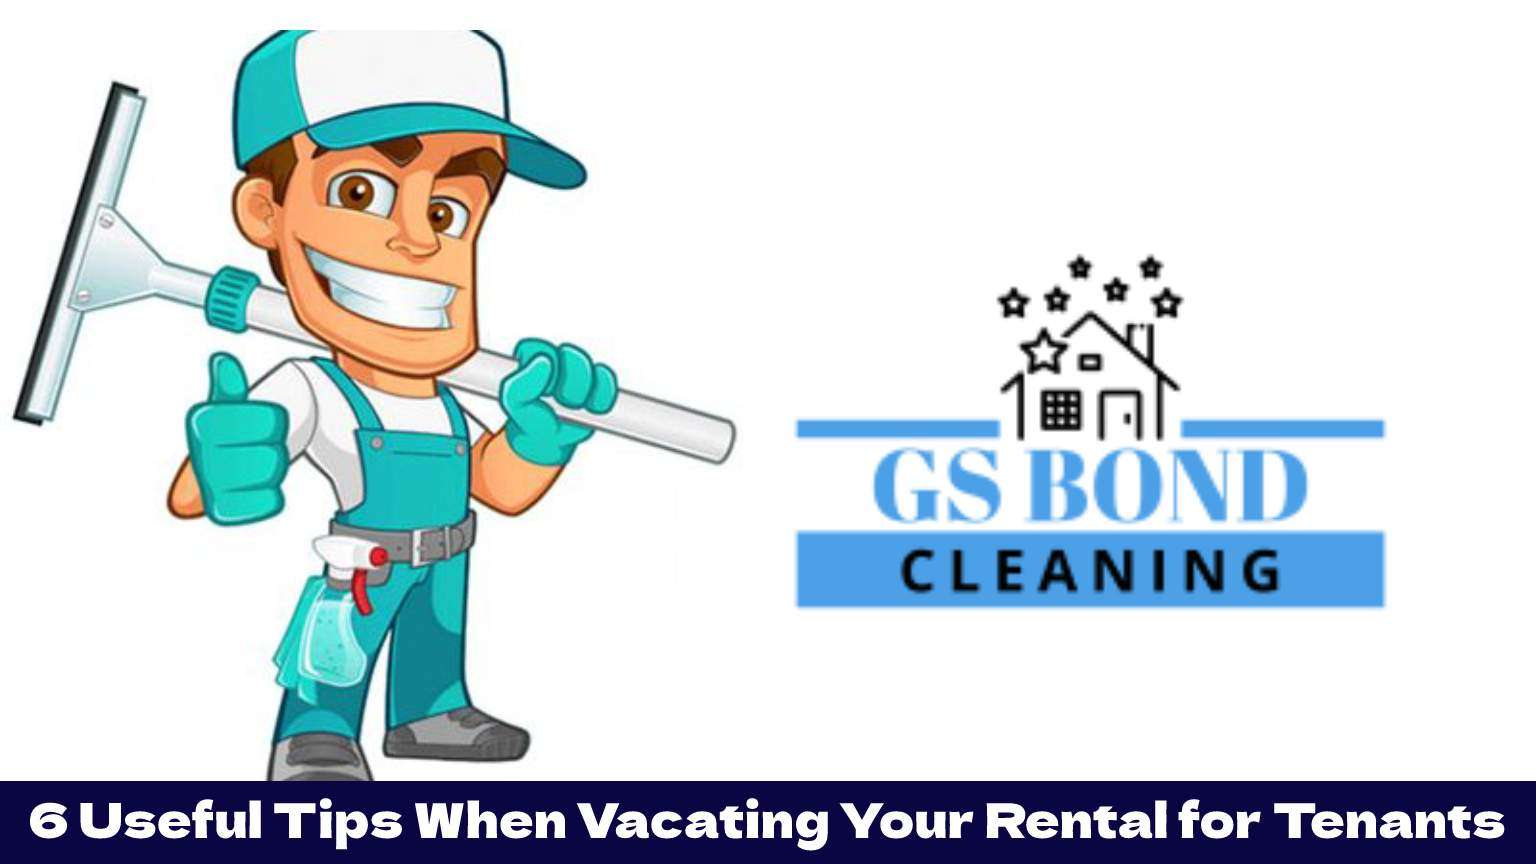 6 Useful Tips When Vacating Your Rental for Tenants